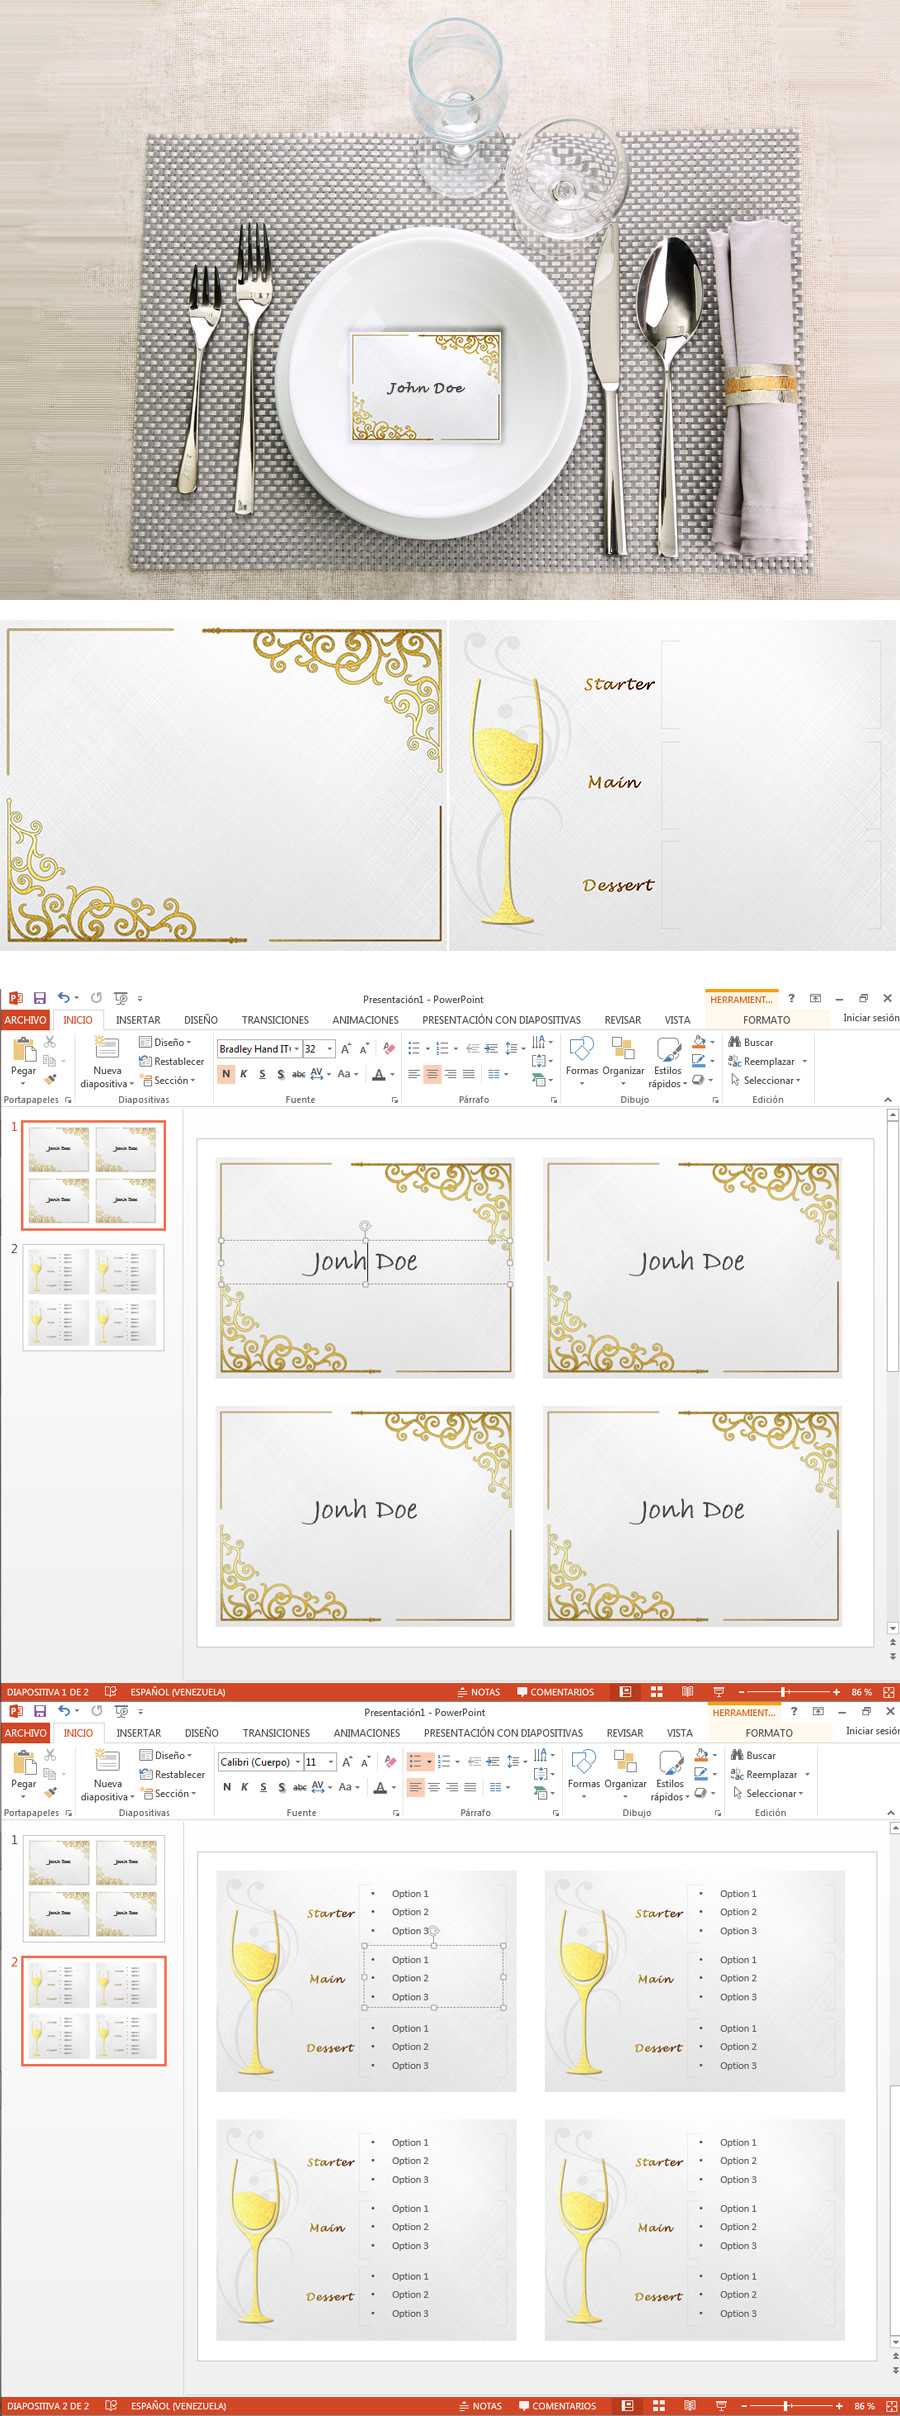 Place Card Template Needed For Microsoft Word – 2 Sided Within Microsoft Word Place Card Template